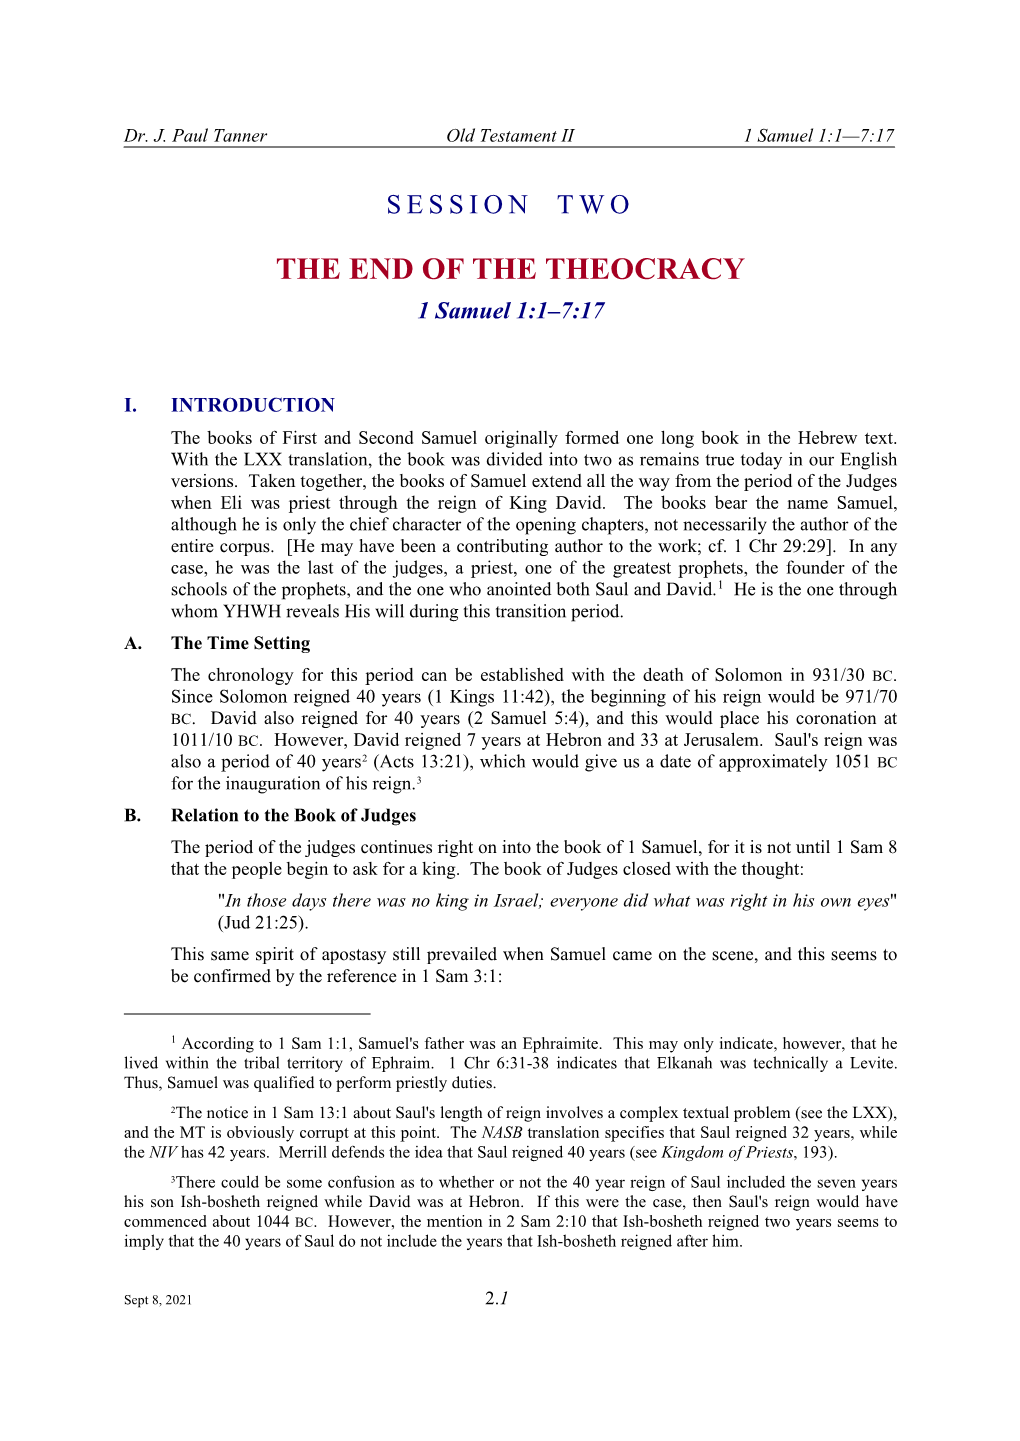 THE END of the THEOCRACY 1 Samuel 1:1–7:17